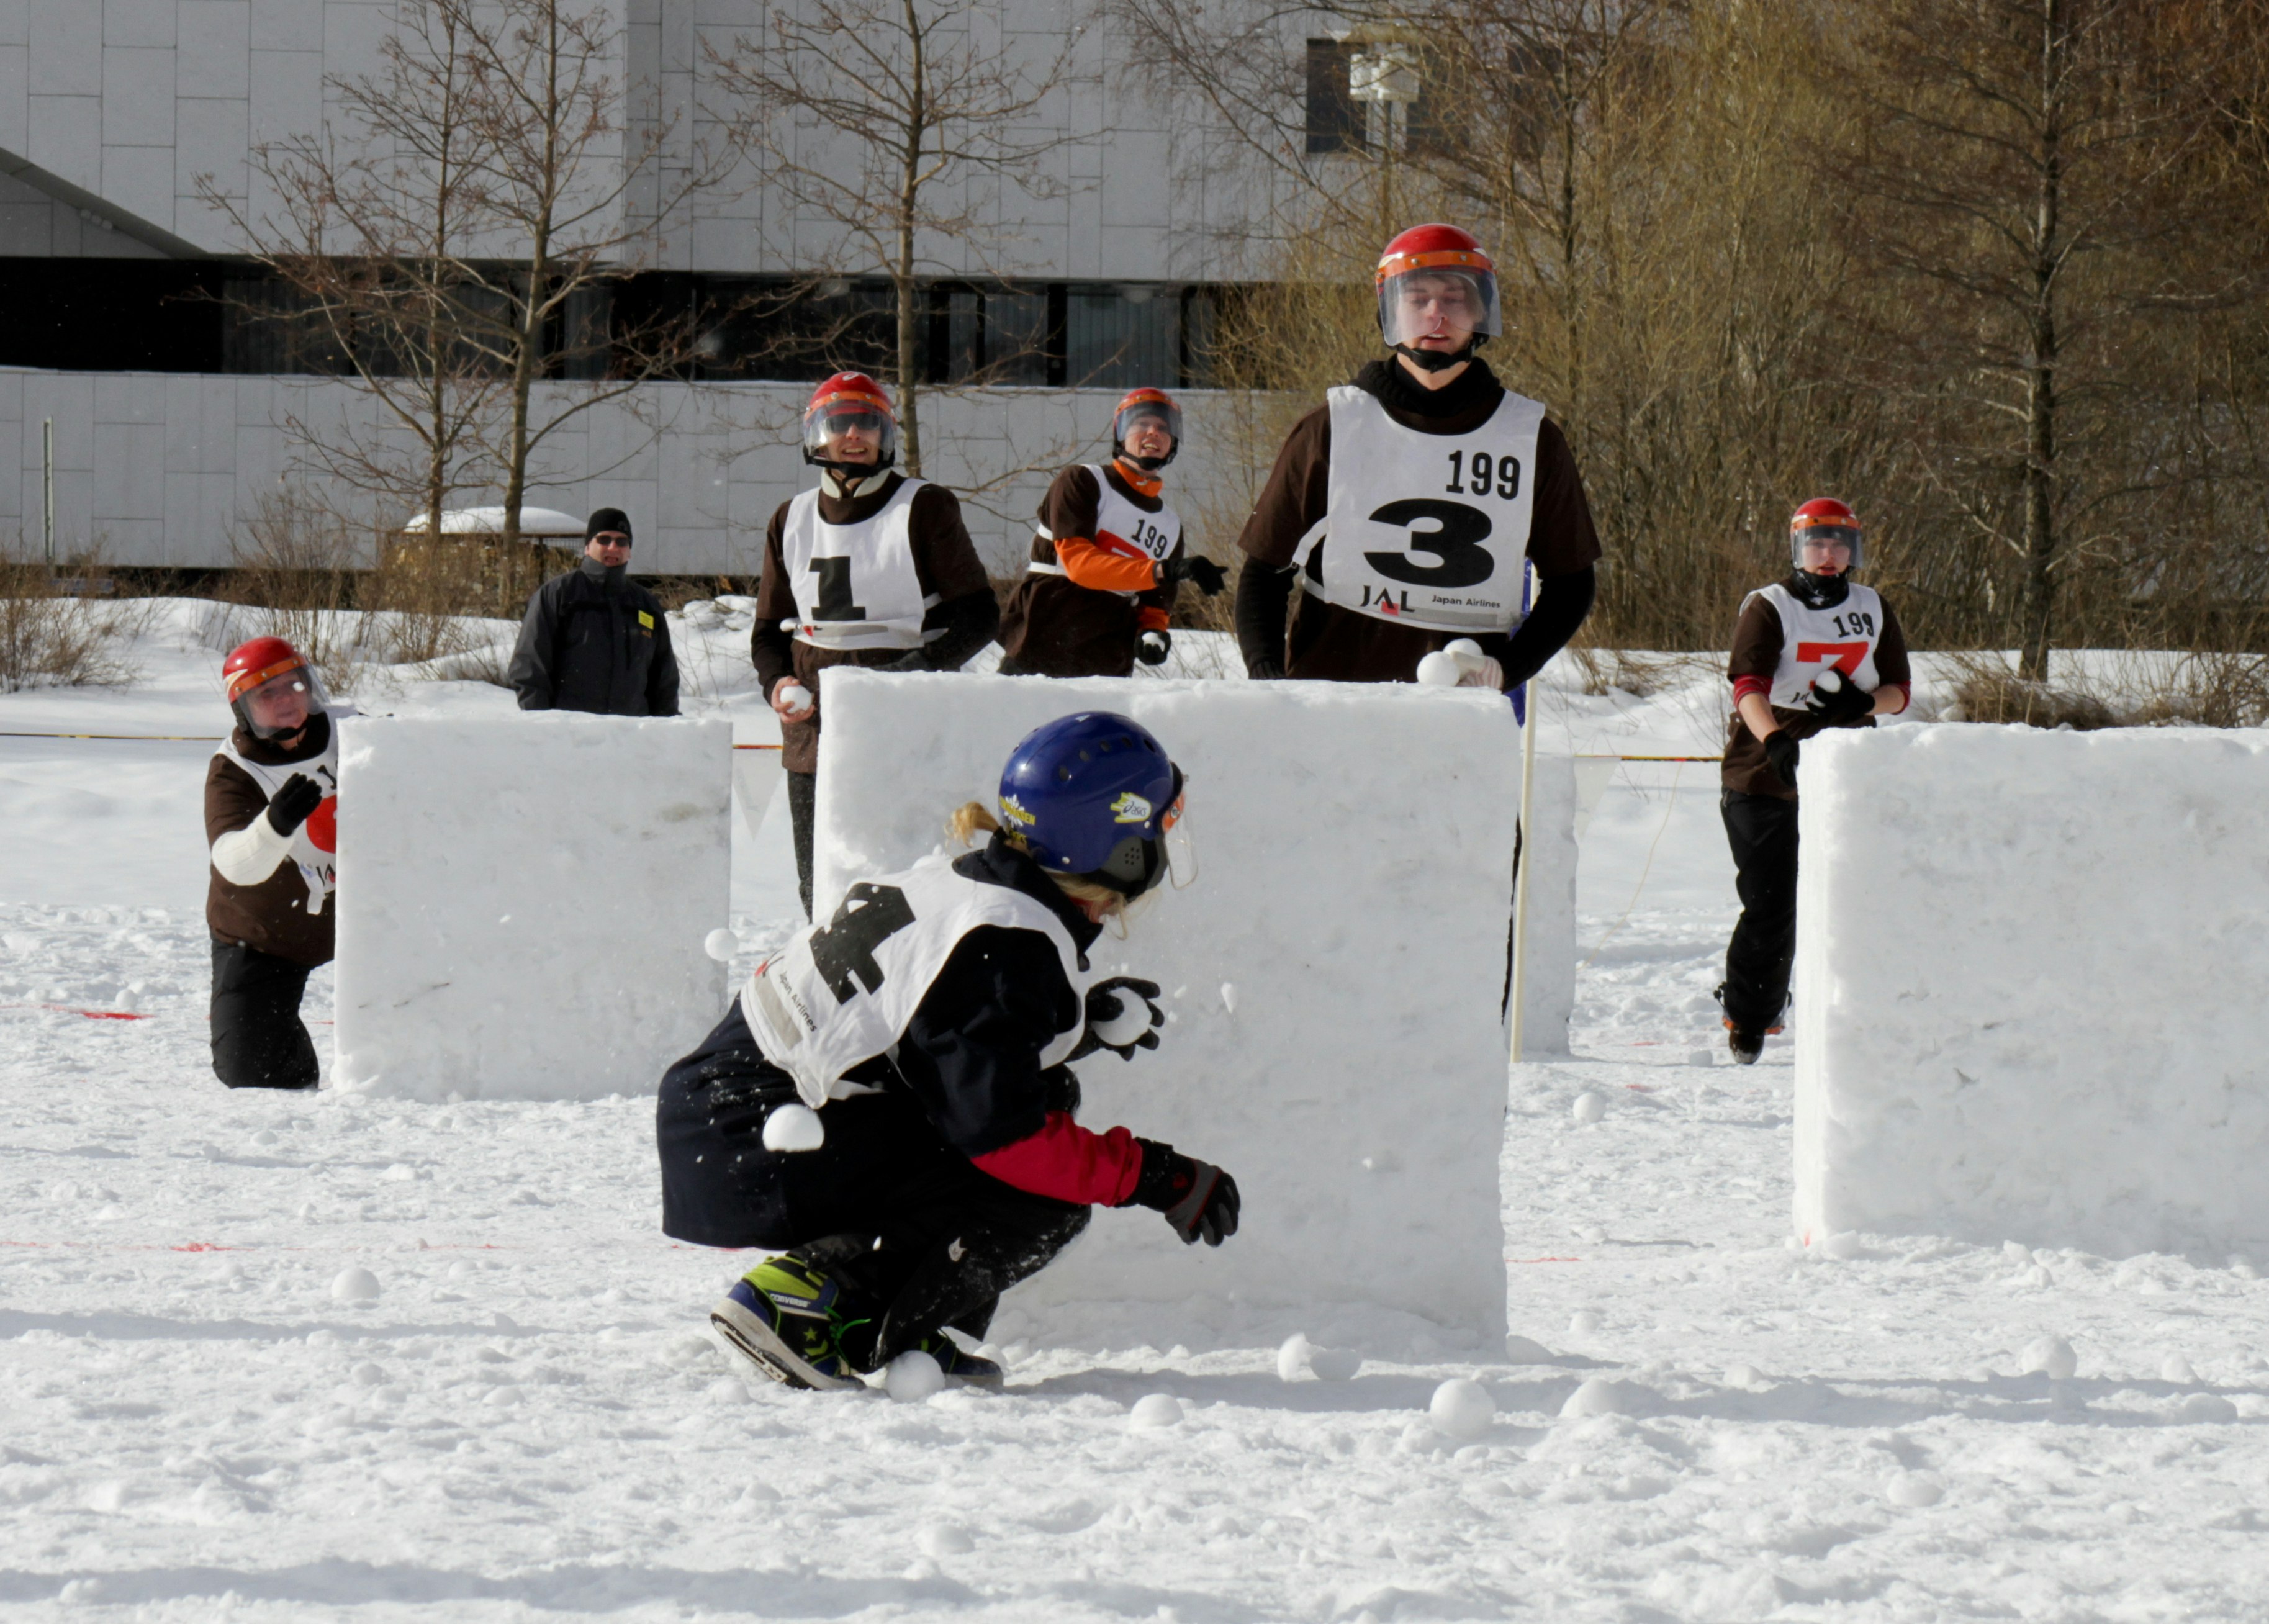 A person wearing a blue helmet and holding a snowball crotches behind a snow barrier as five people with red helmets advance in their direction during a snowball competition in Finland.